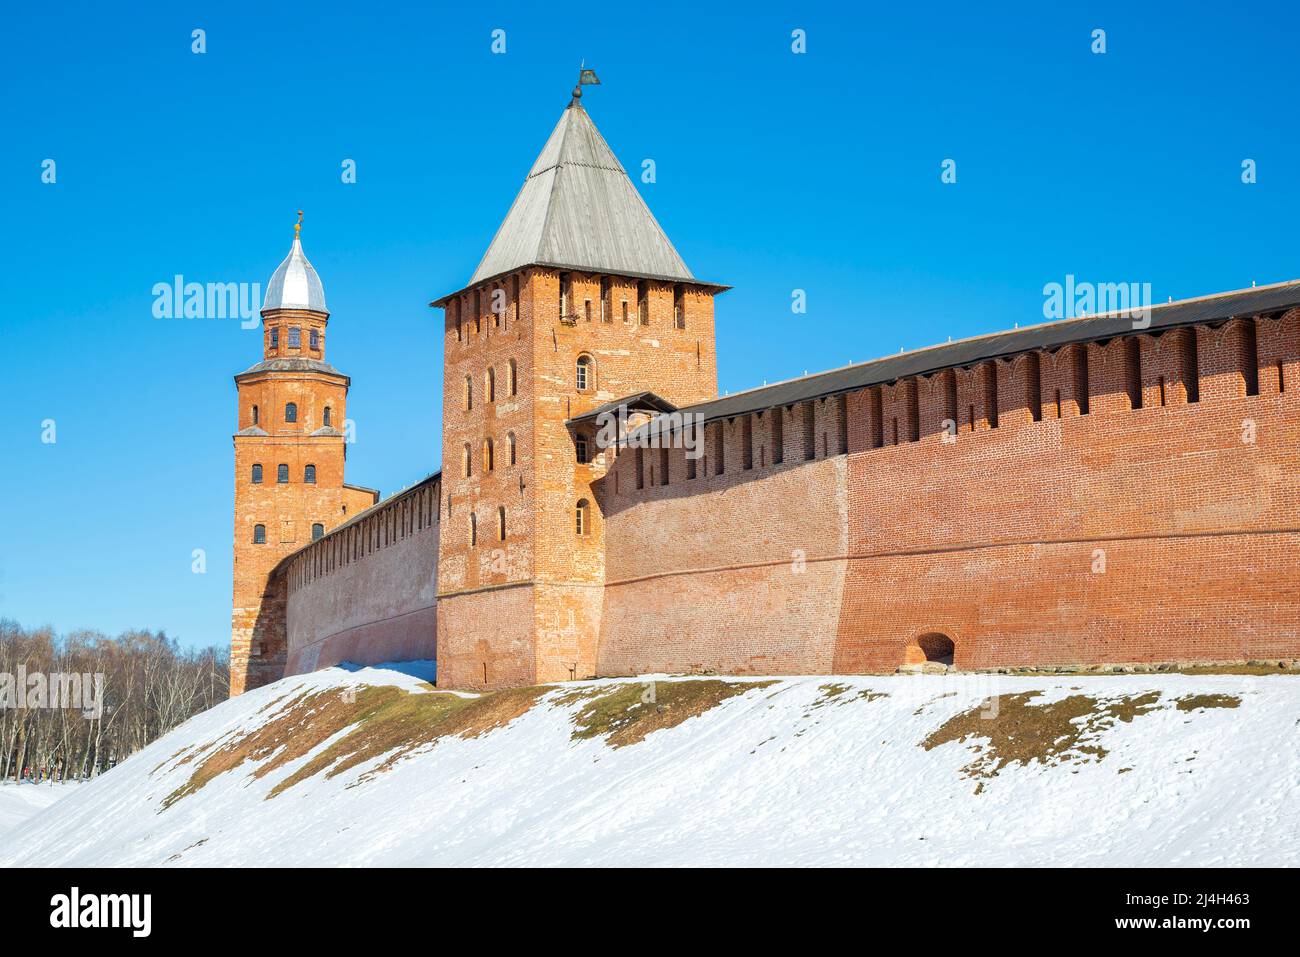 The ancient towers of the Kremlin of Veliky Novgorod on a clear frosty day. Russia Stock Photo